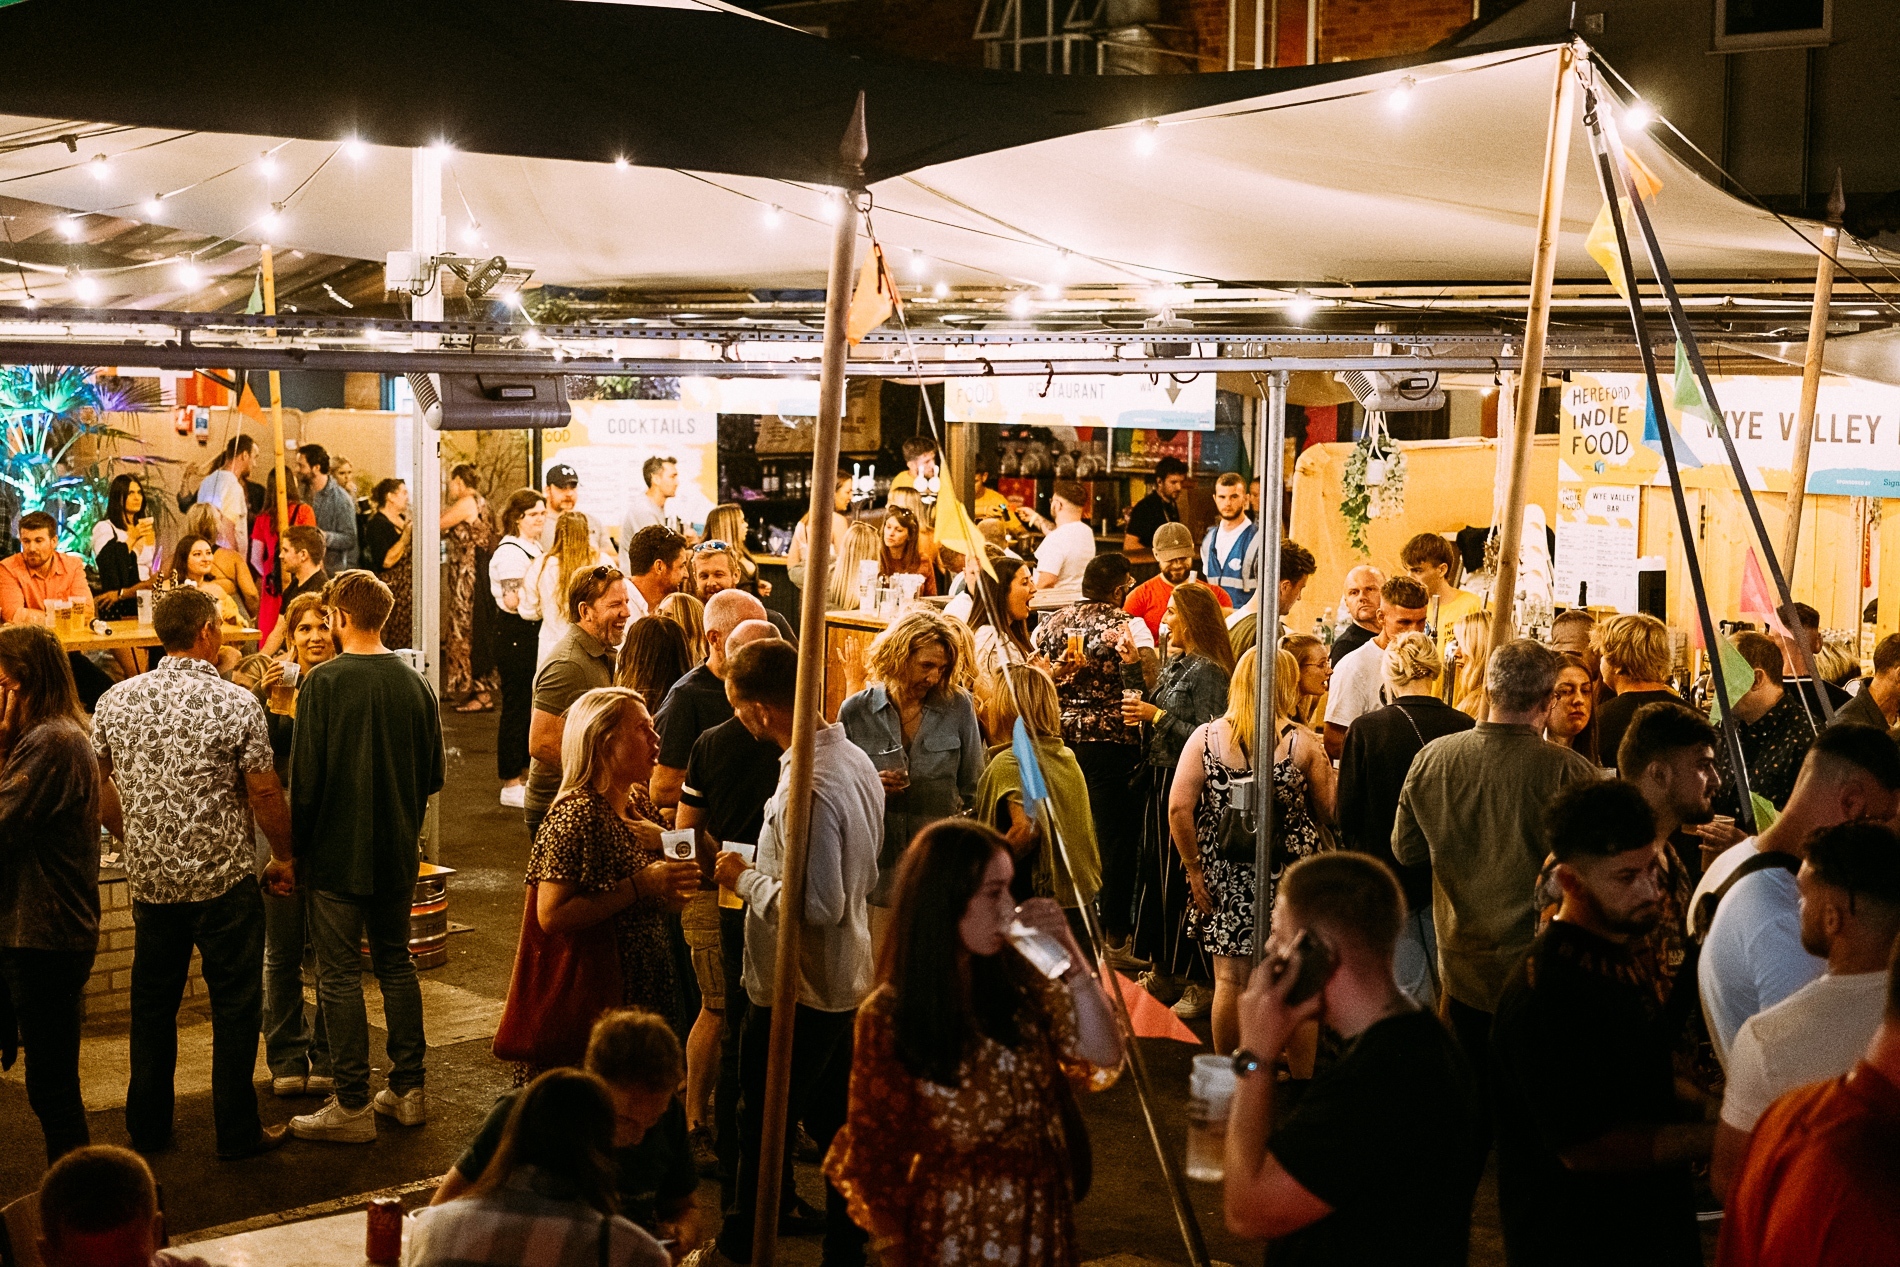 Hereford Indie Food will be returning in 2023